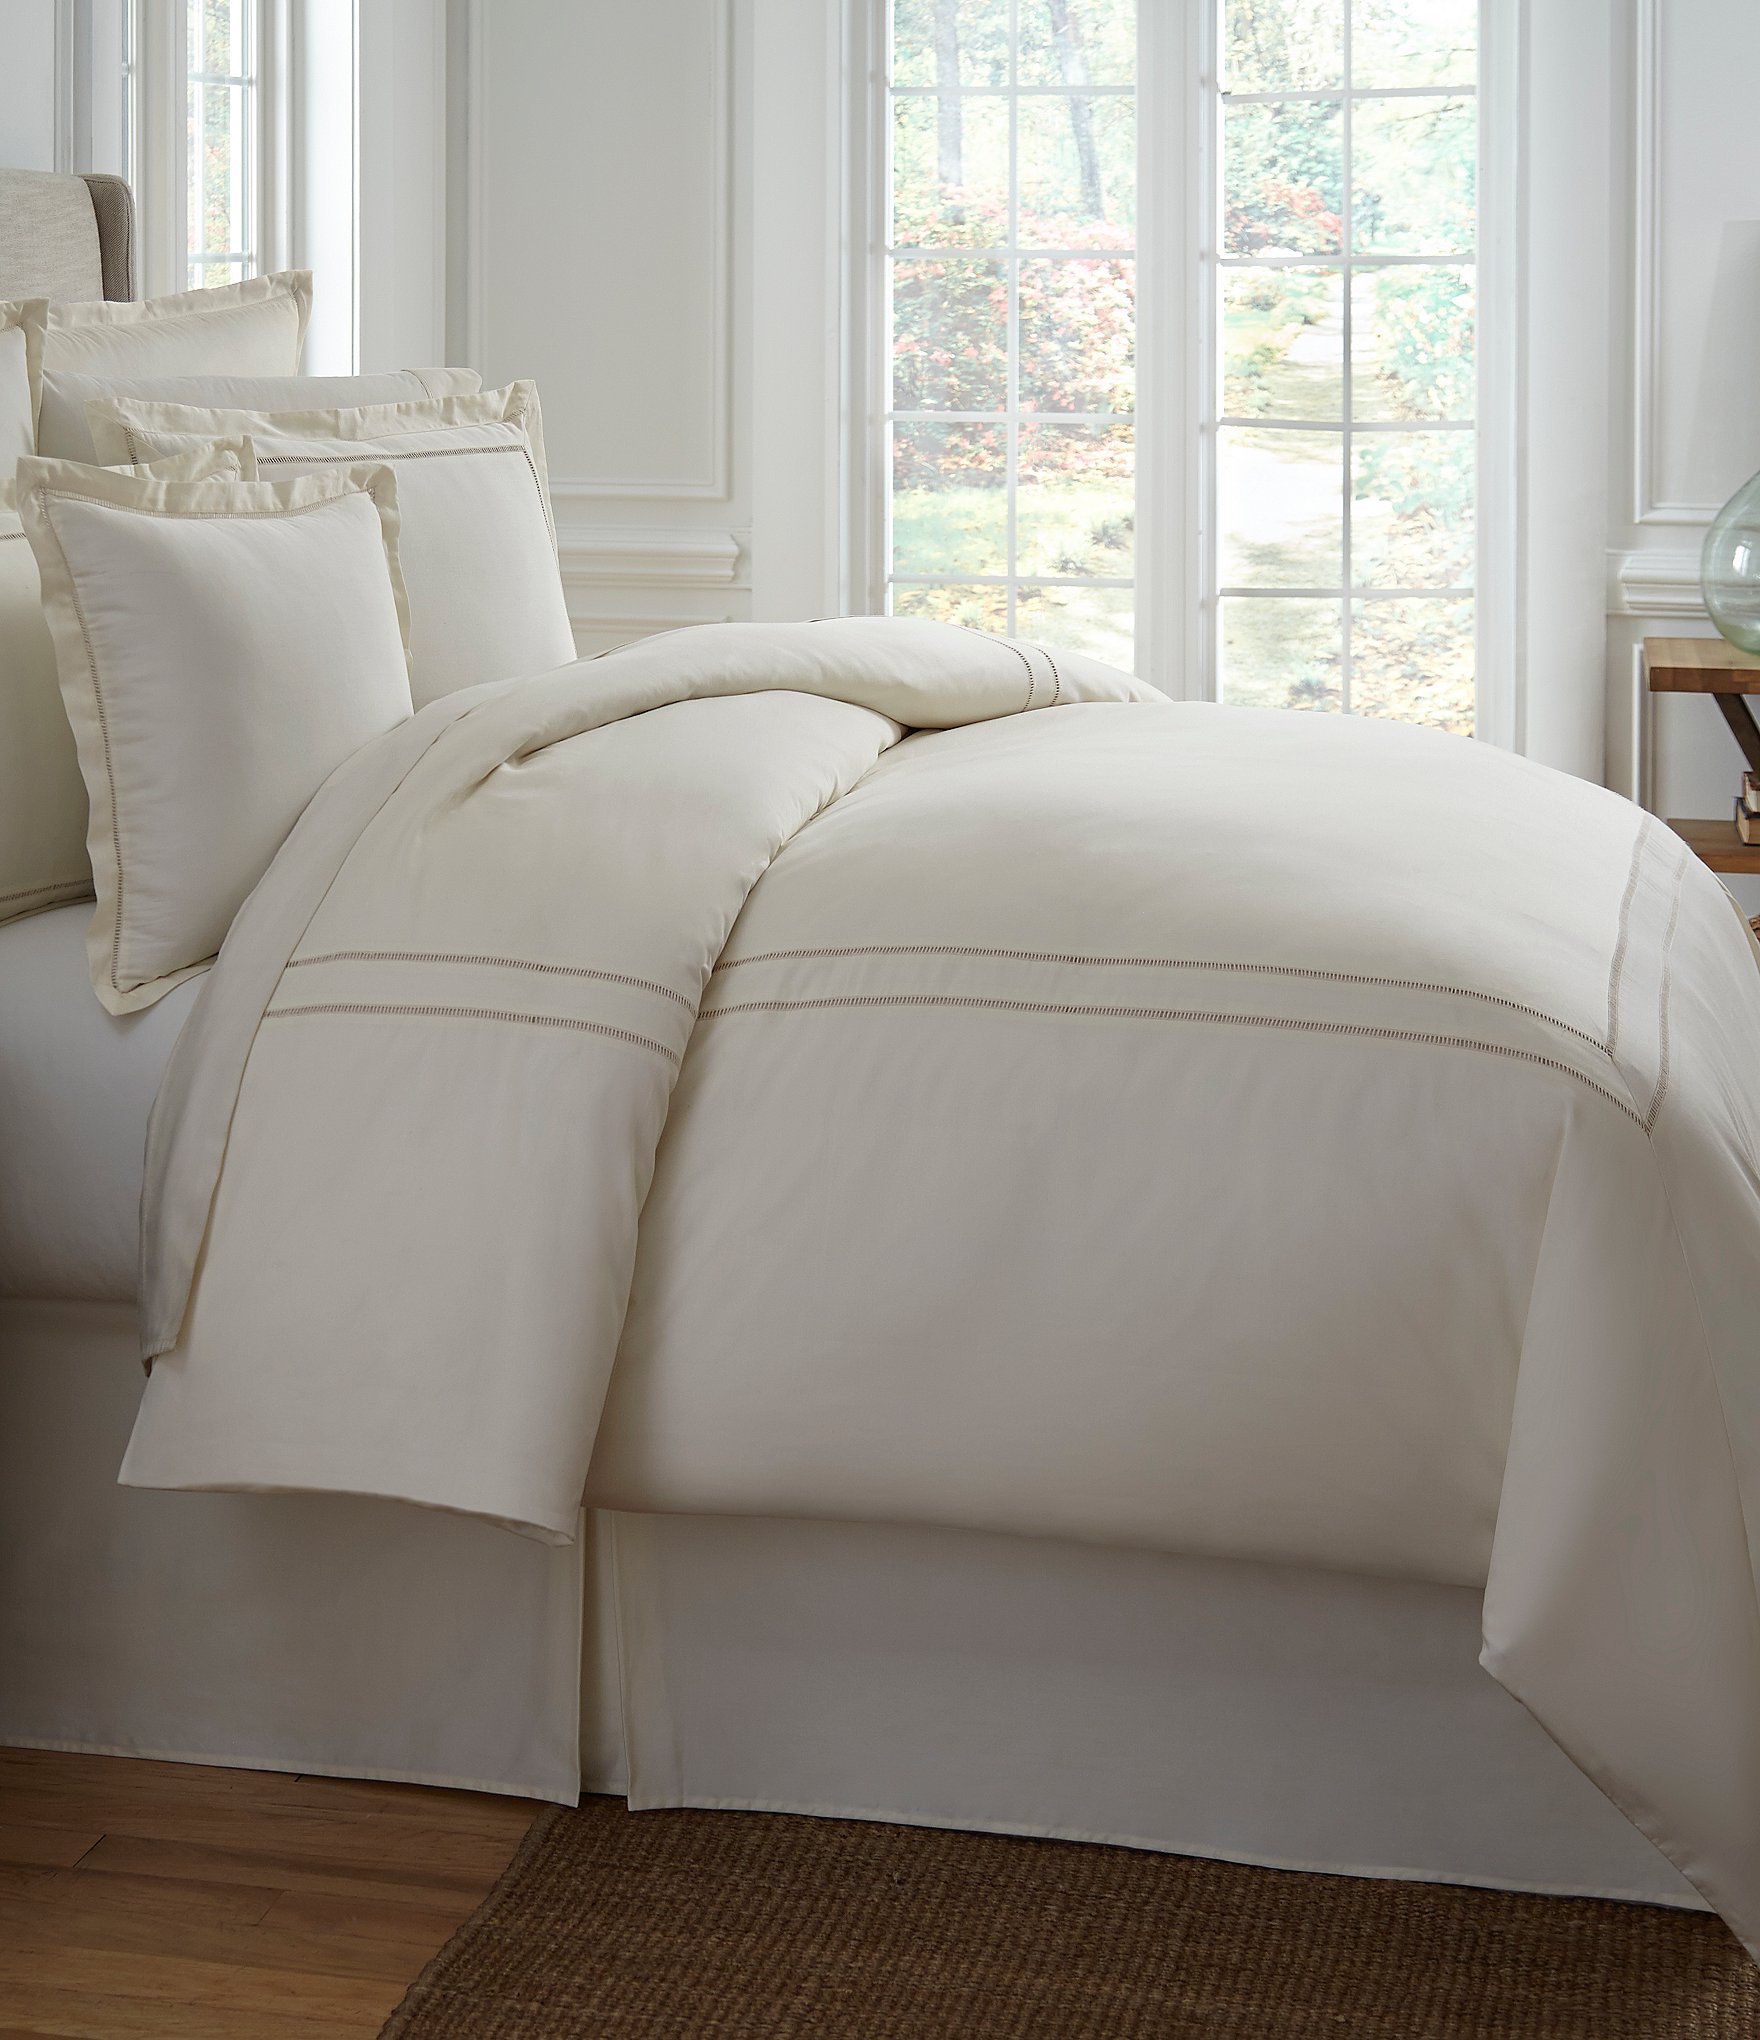 Southern Living Heirloom 500 Thread, Southern Living Duvet Covers